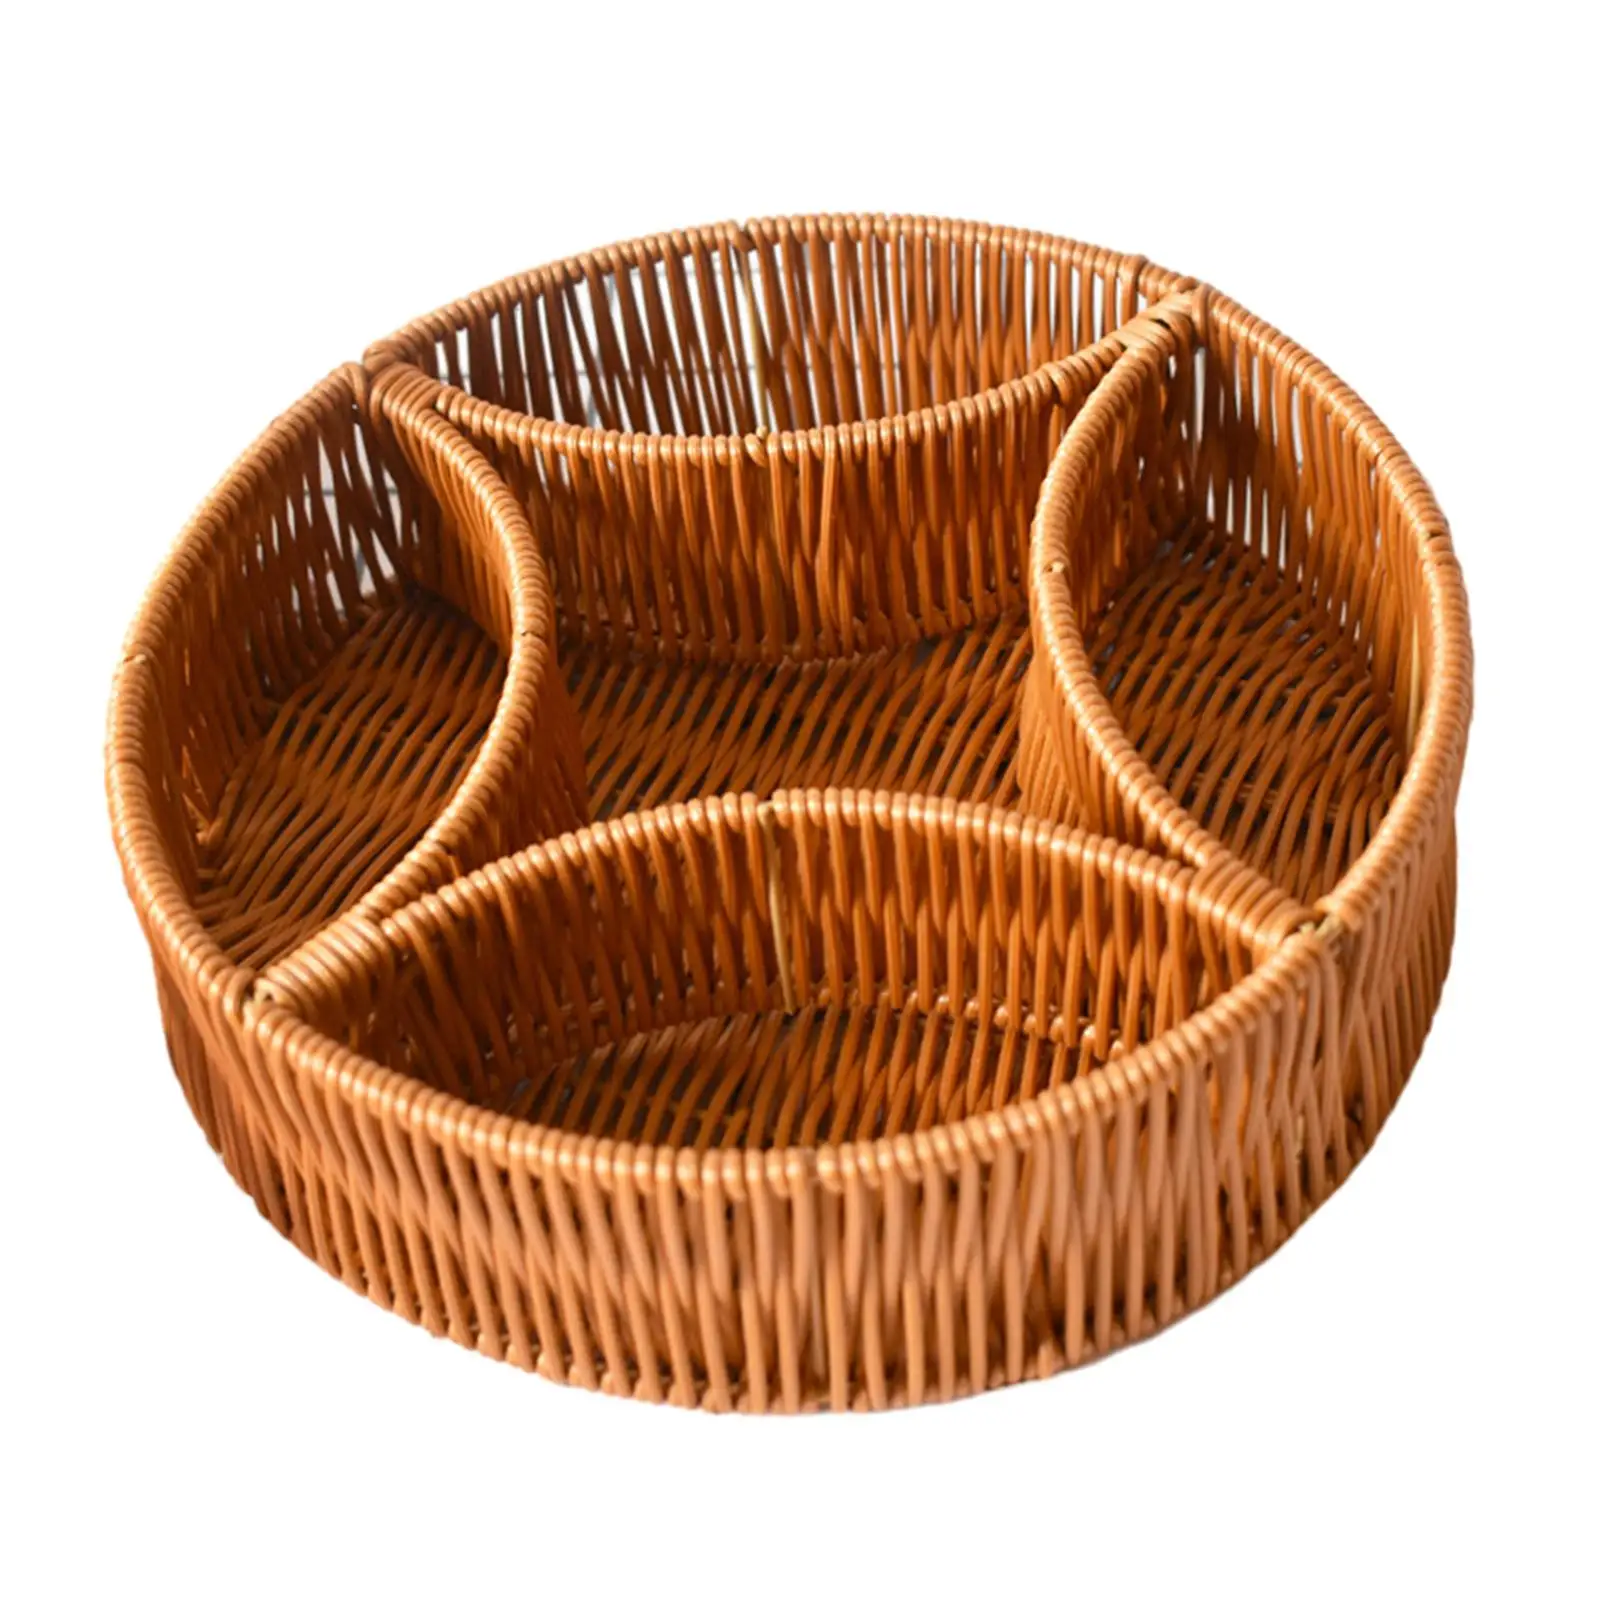 Hand Woven Serving Basket Versatile Dividers Farmhouse Divided Bread Basket for Restaurant Kitchen Coffee Table Dining Hotel